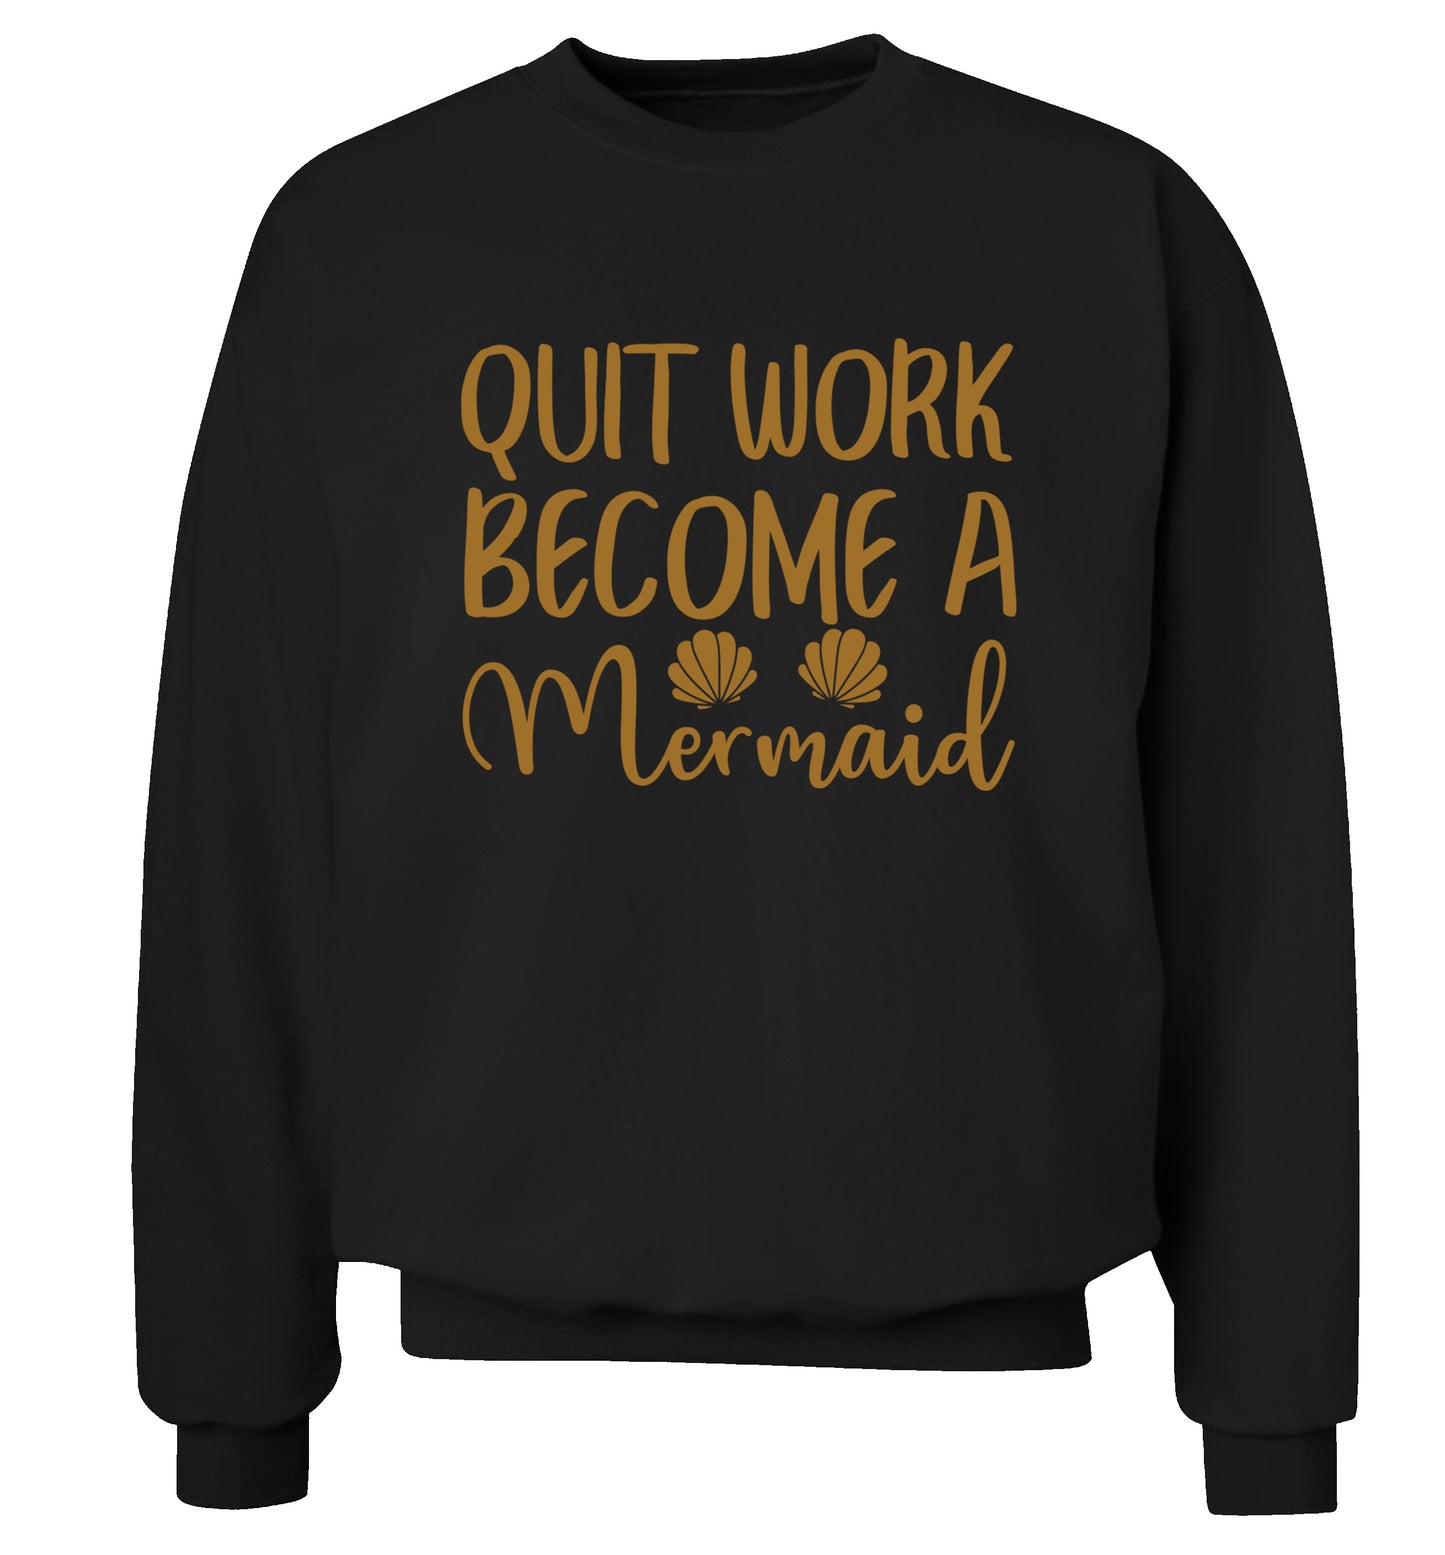 Quit work become a mermaid Adult's unisex black Sweater 2XL